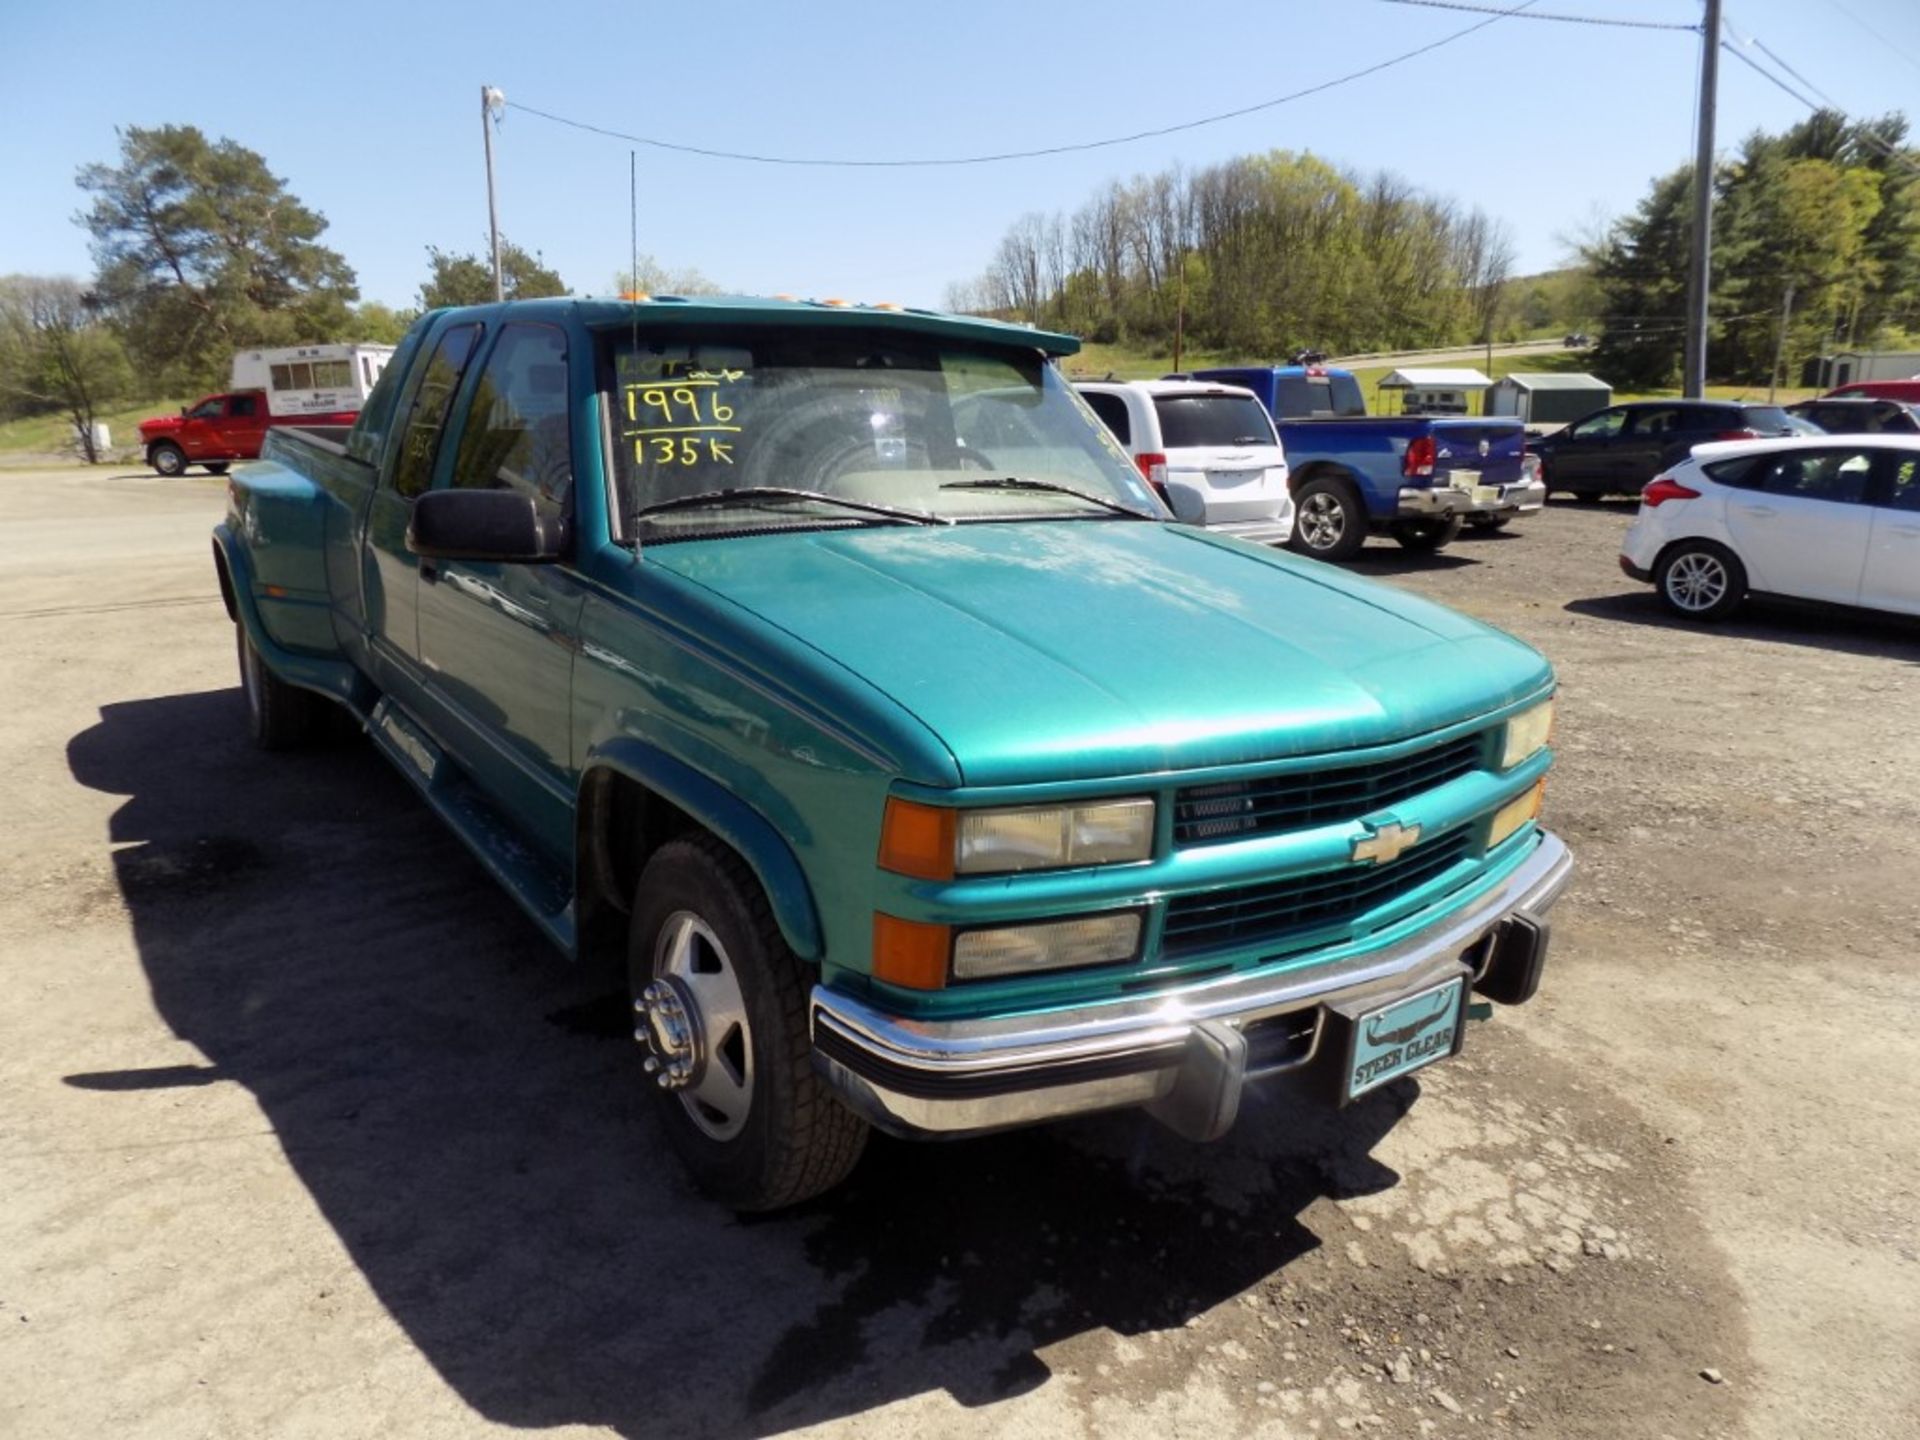 1996 Chevrolet Silverado 3500 Ext. Cab, 2 WD Diesel, Centurion Conversion Package with Leather,